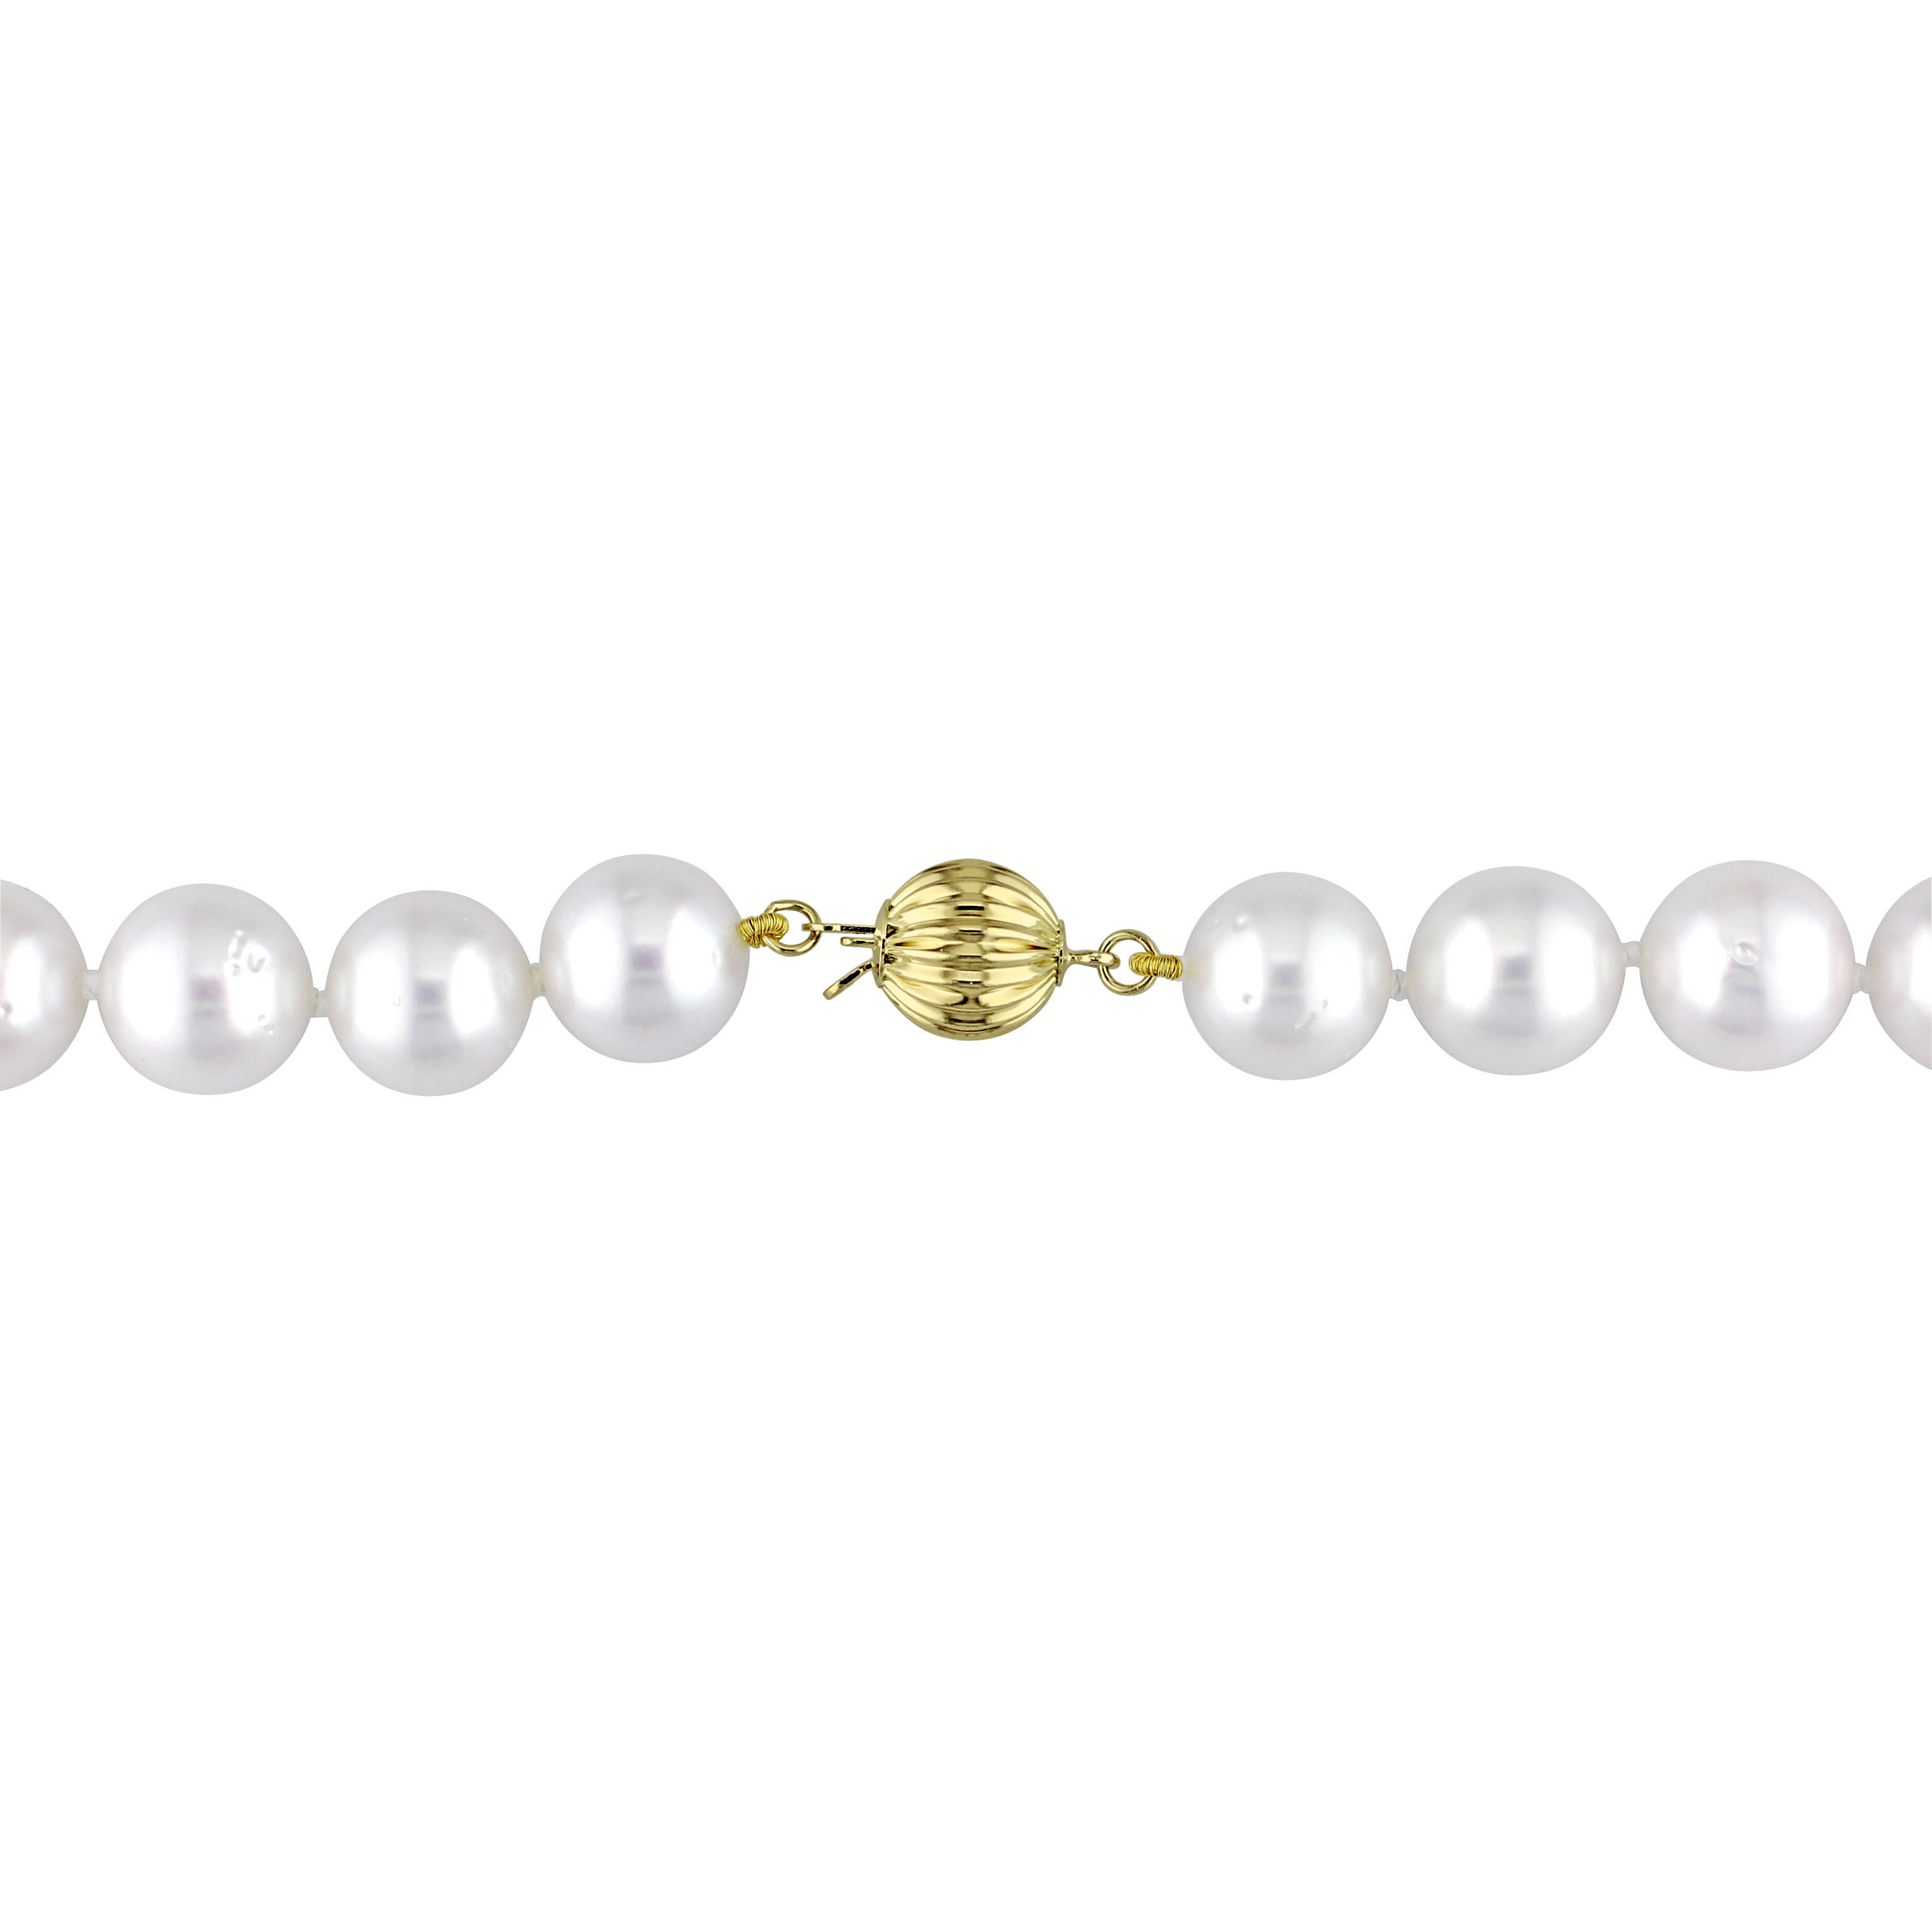 10 - 11.5 MM White South Sea Pearl Strand Necklace with 14k Yellow Gold Clasp - 18 in